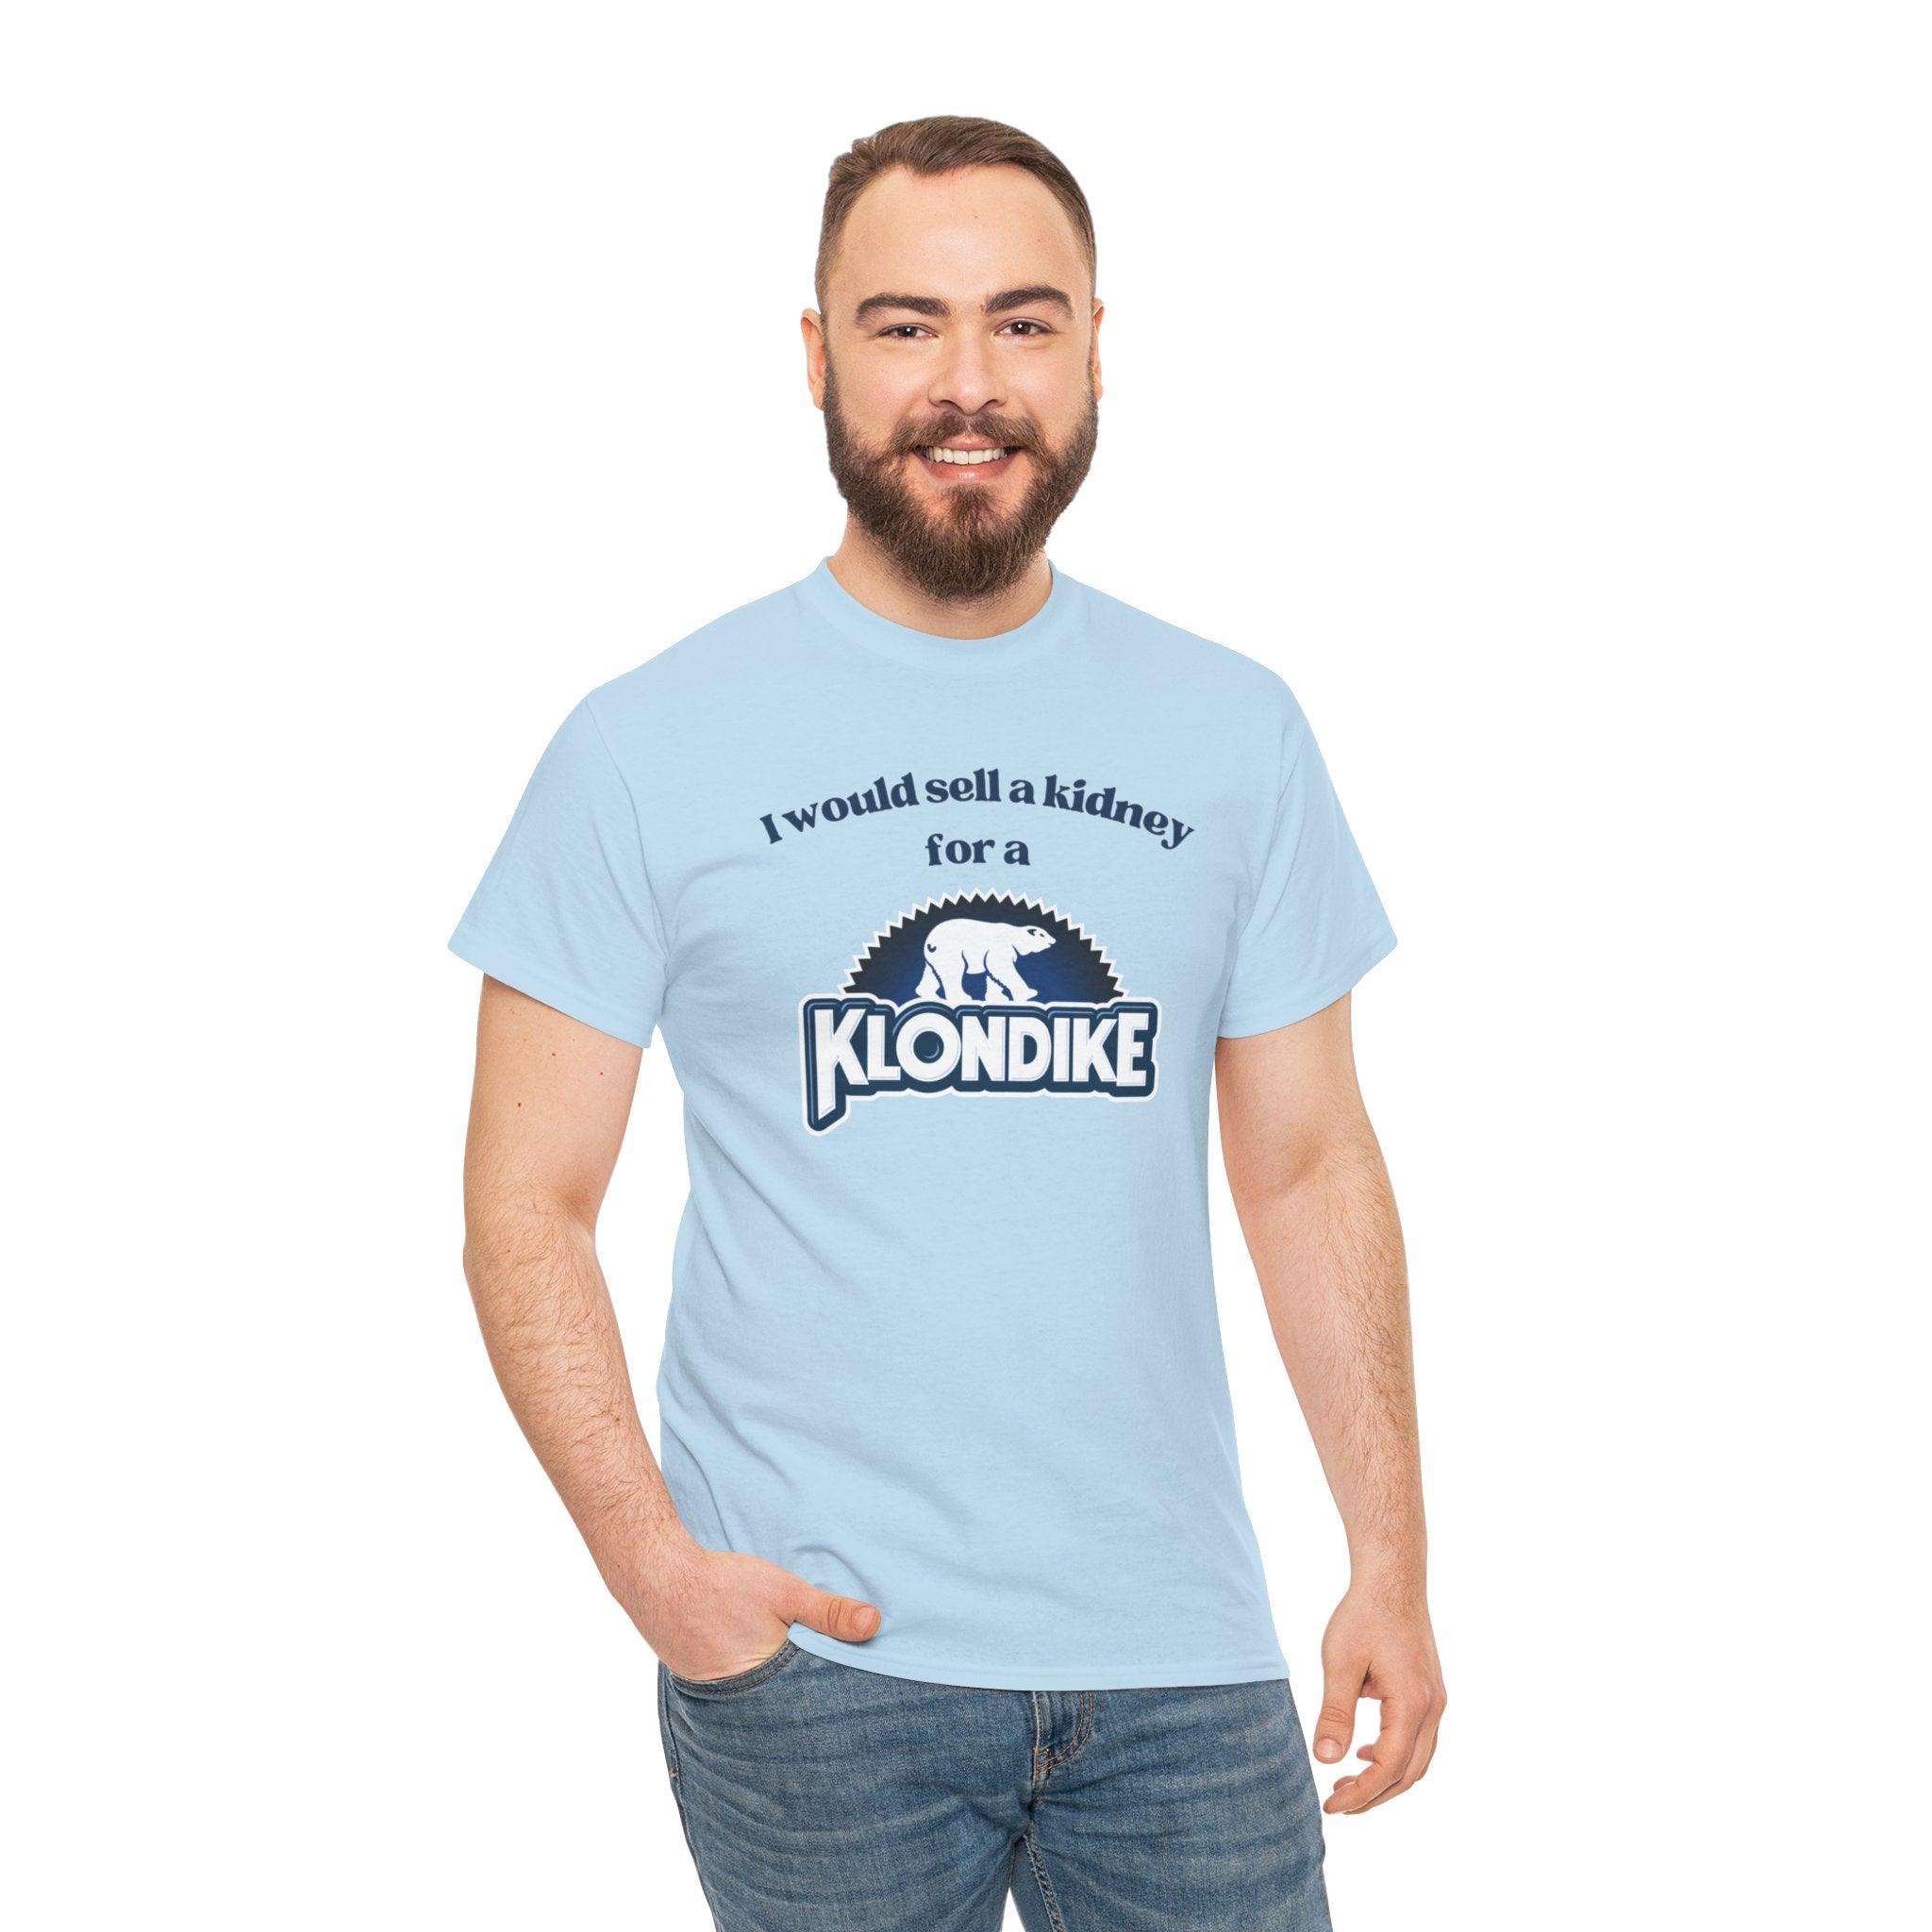 I Would Sell a Kidney for a Klondike Shirt